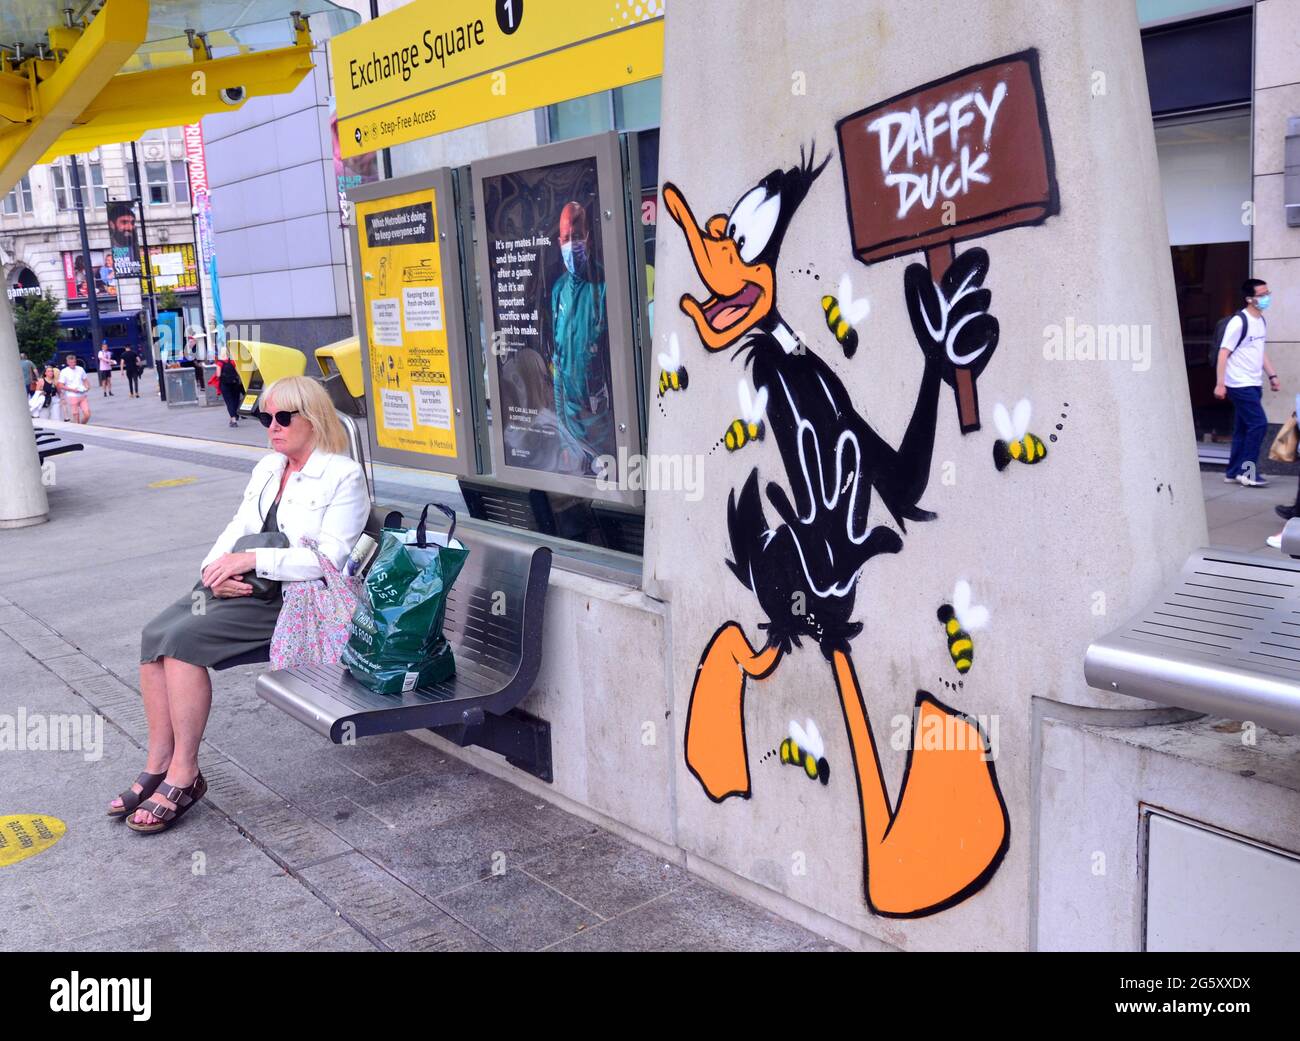 A woman sits next to an image of Daffy Duck cartoon character, part of a Looney Tunes art trail which has opened in Manchester, England. Stock Photo